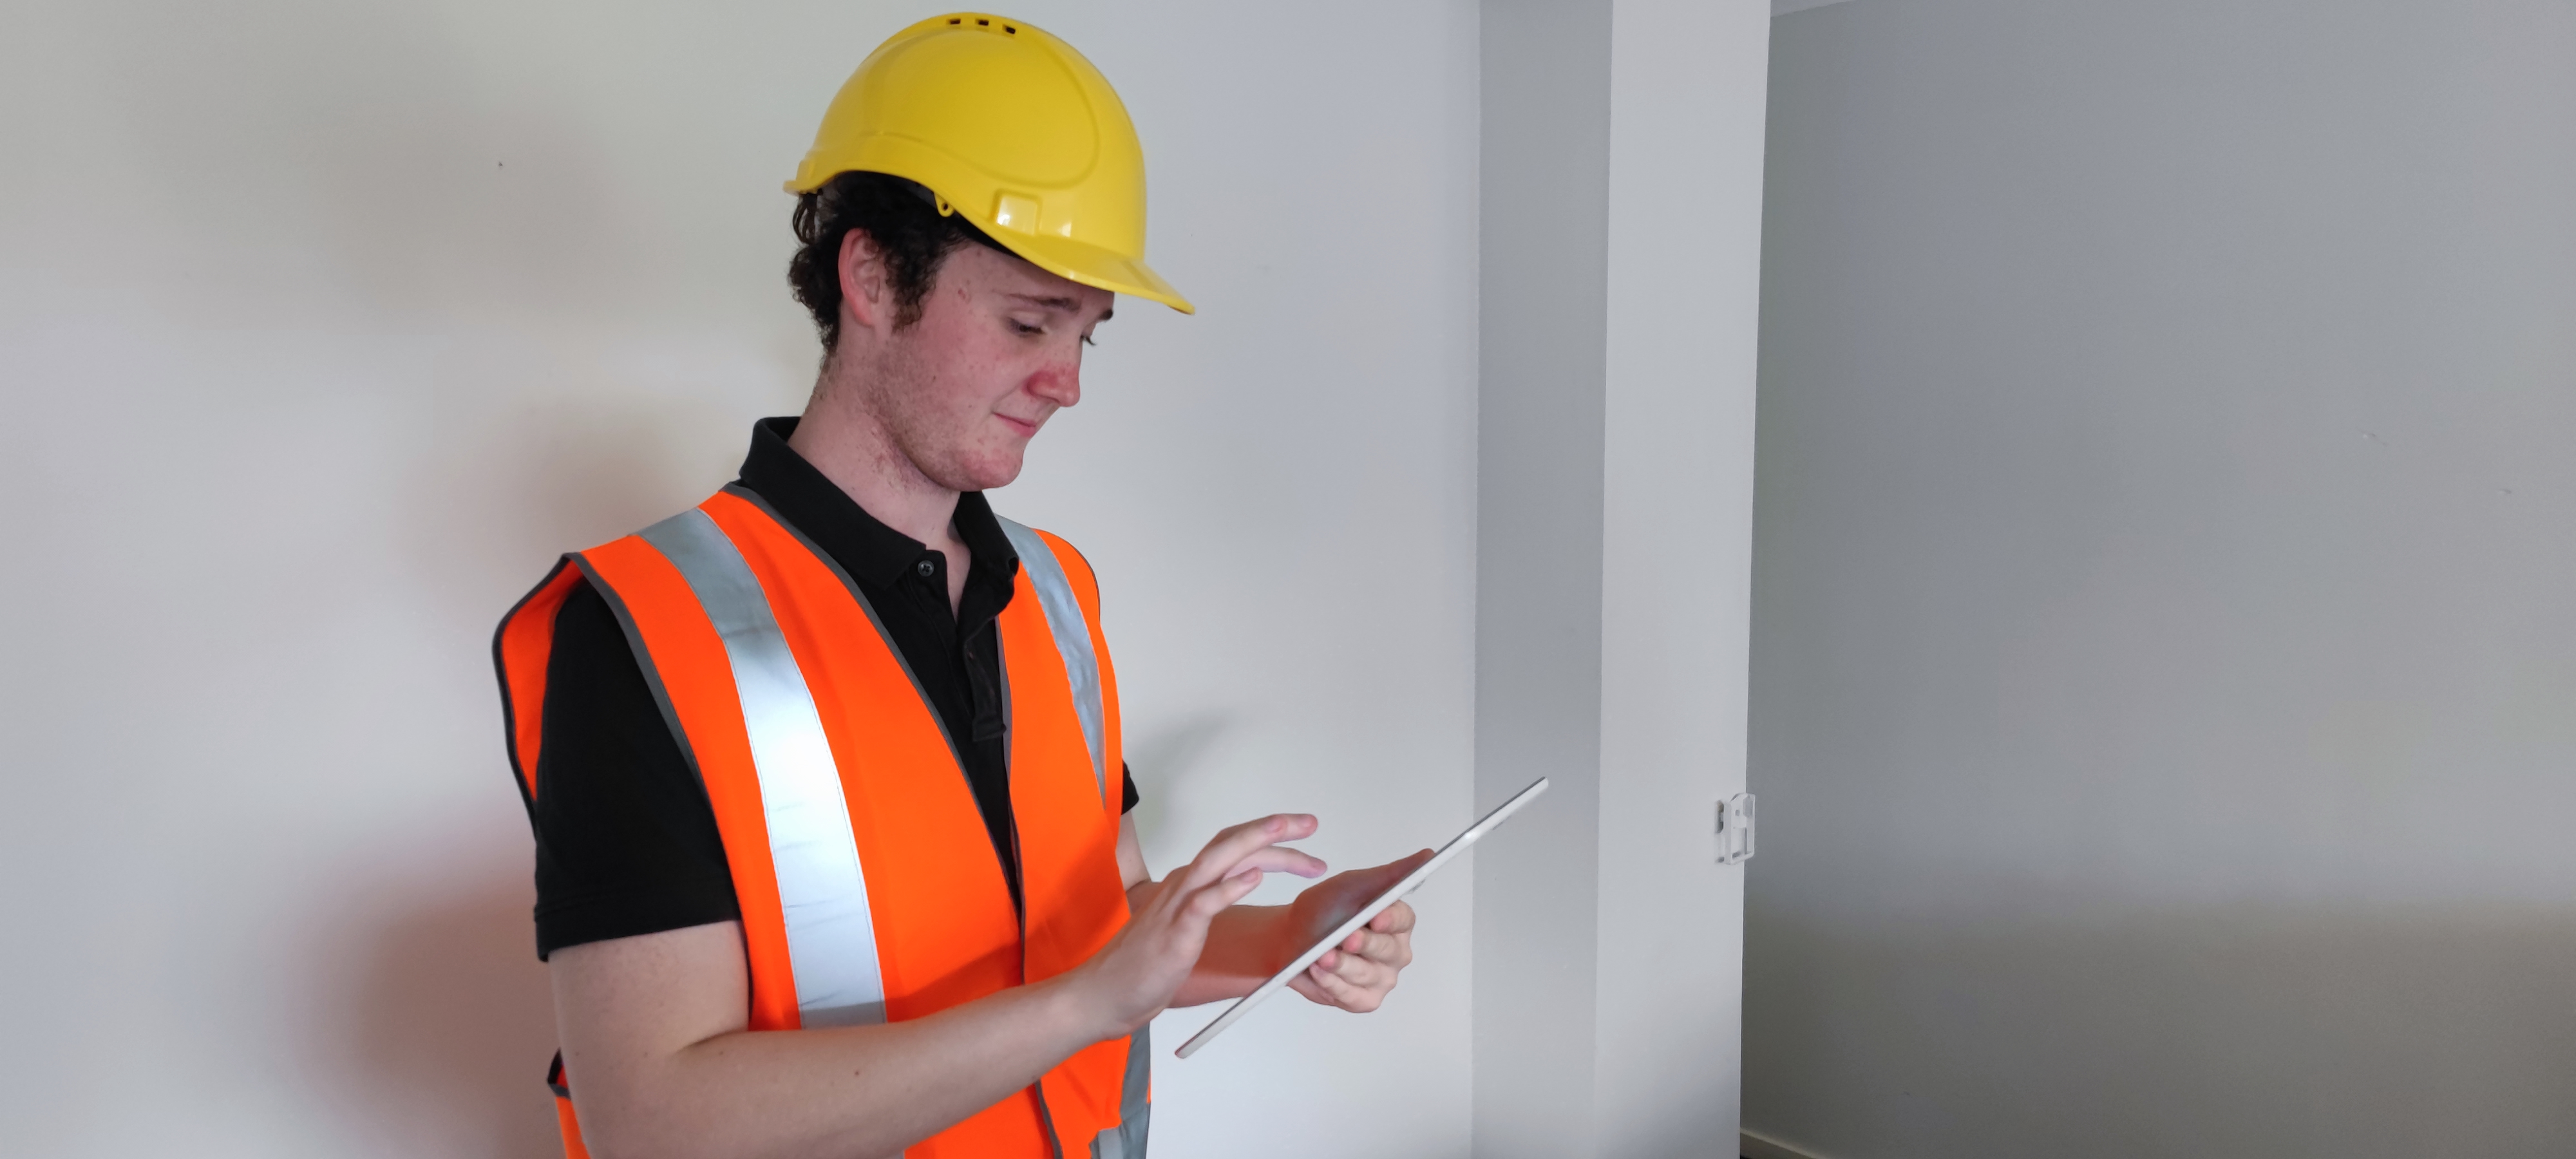 Image of a Tradesperson holding a tablet